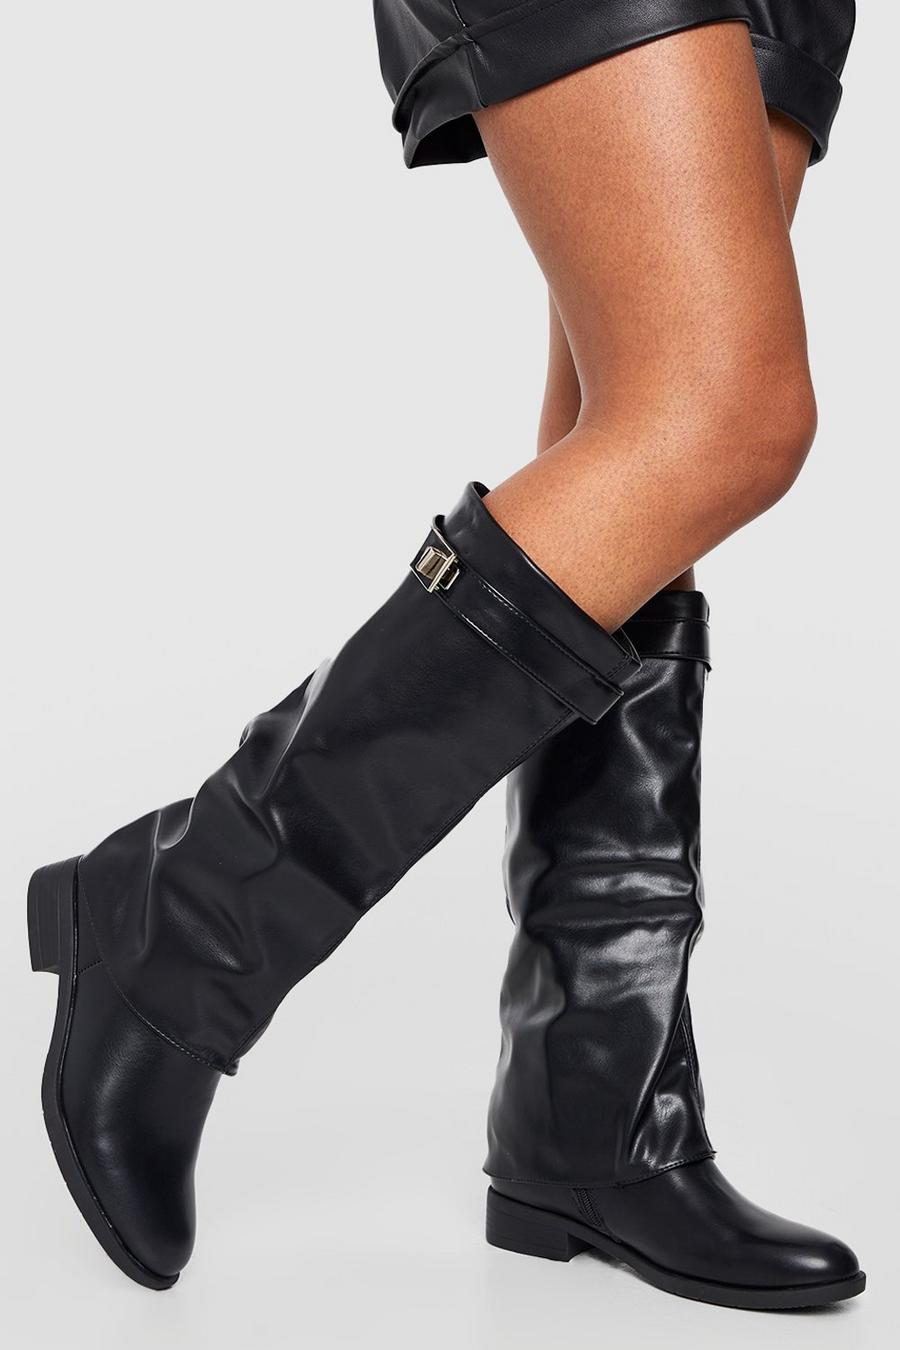 Black Fold Over Metal Detail Knee High Boots